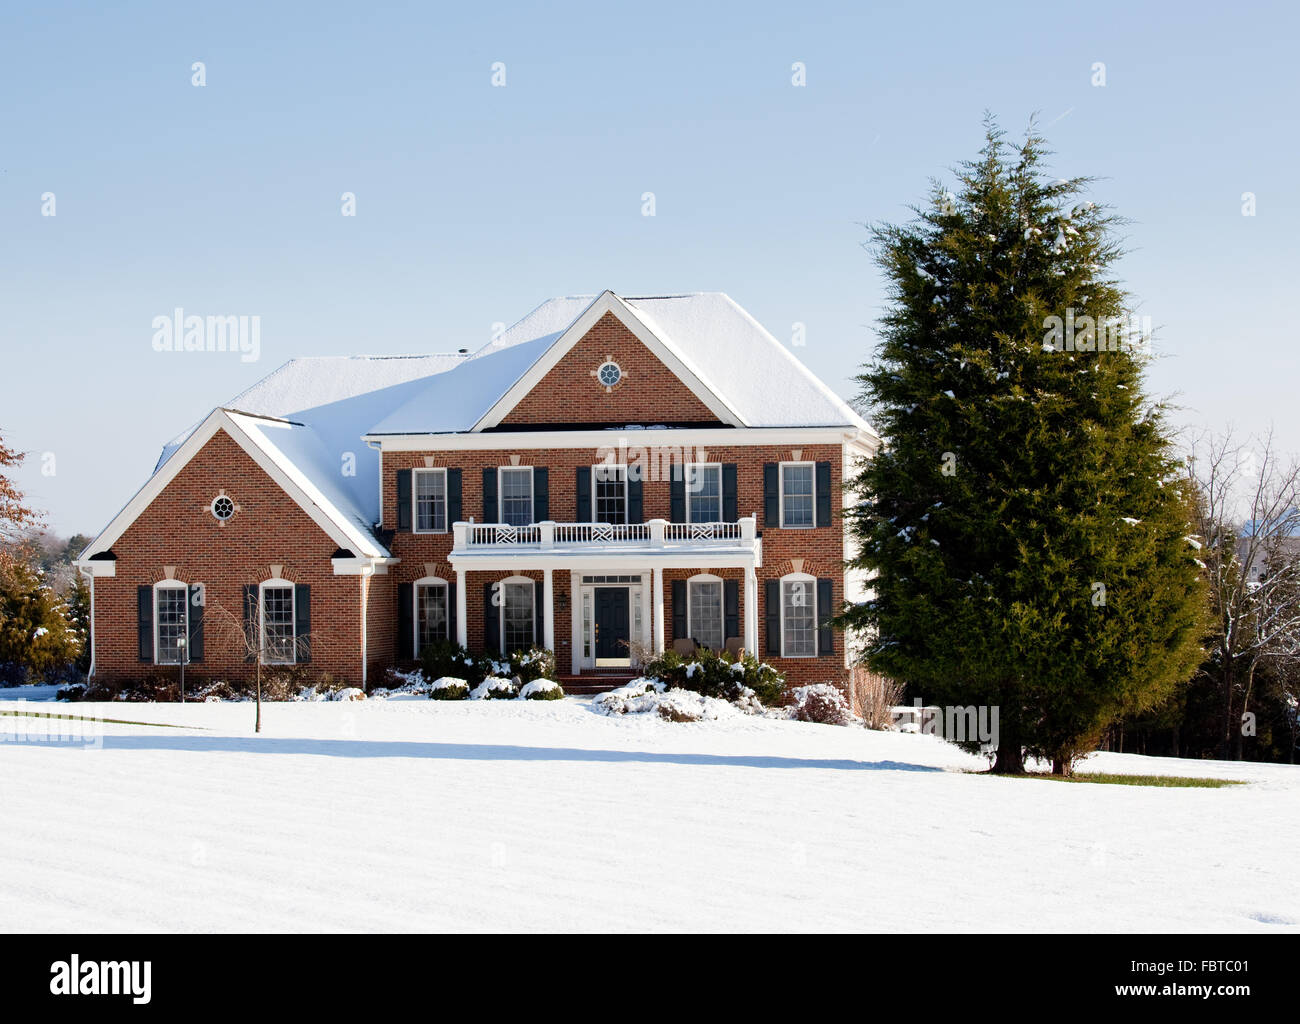 Modern home in a snowy setting with a conifer in the foreground Stock Photo